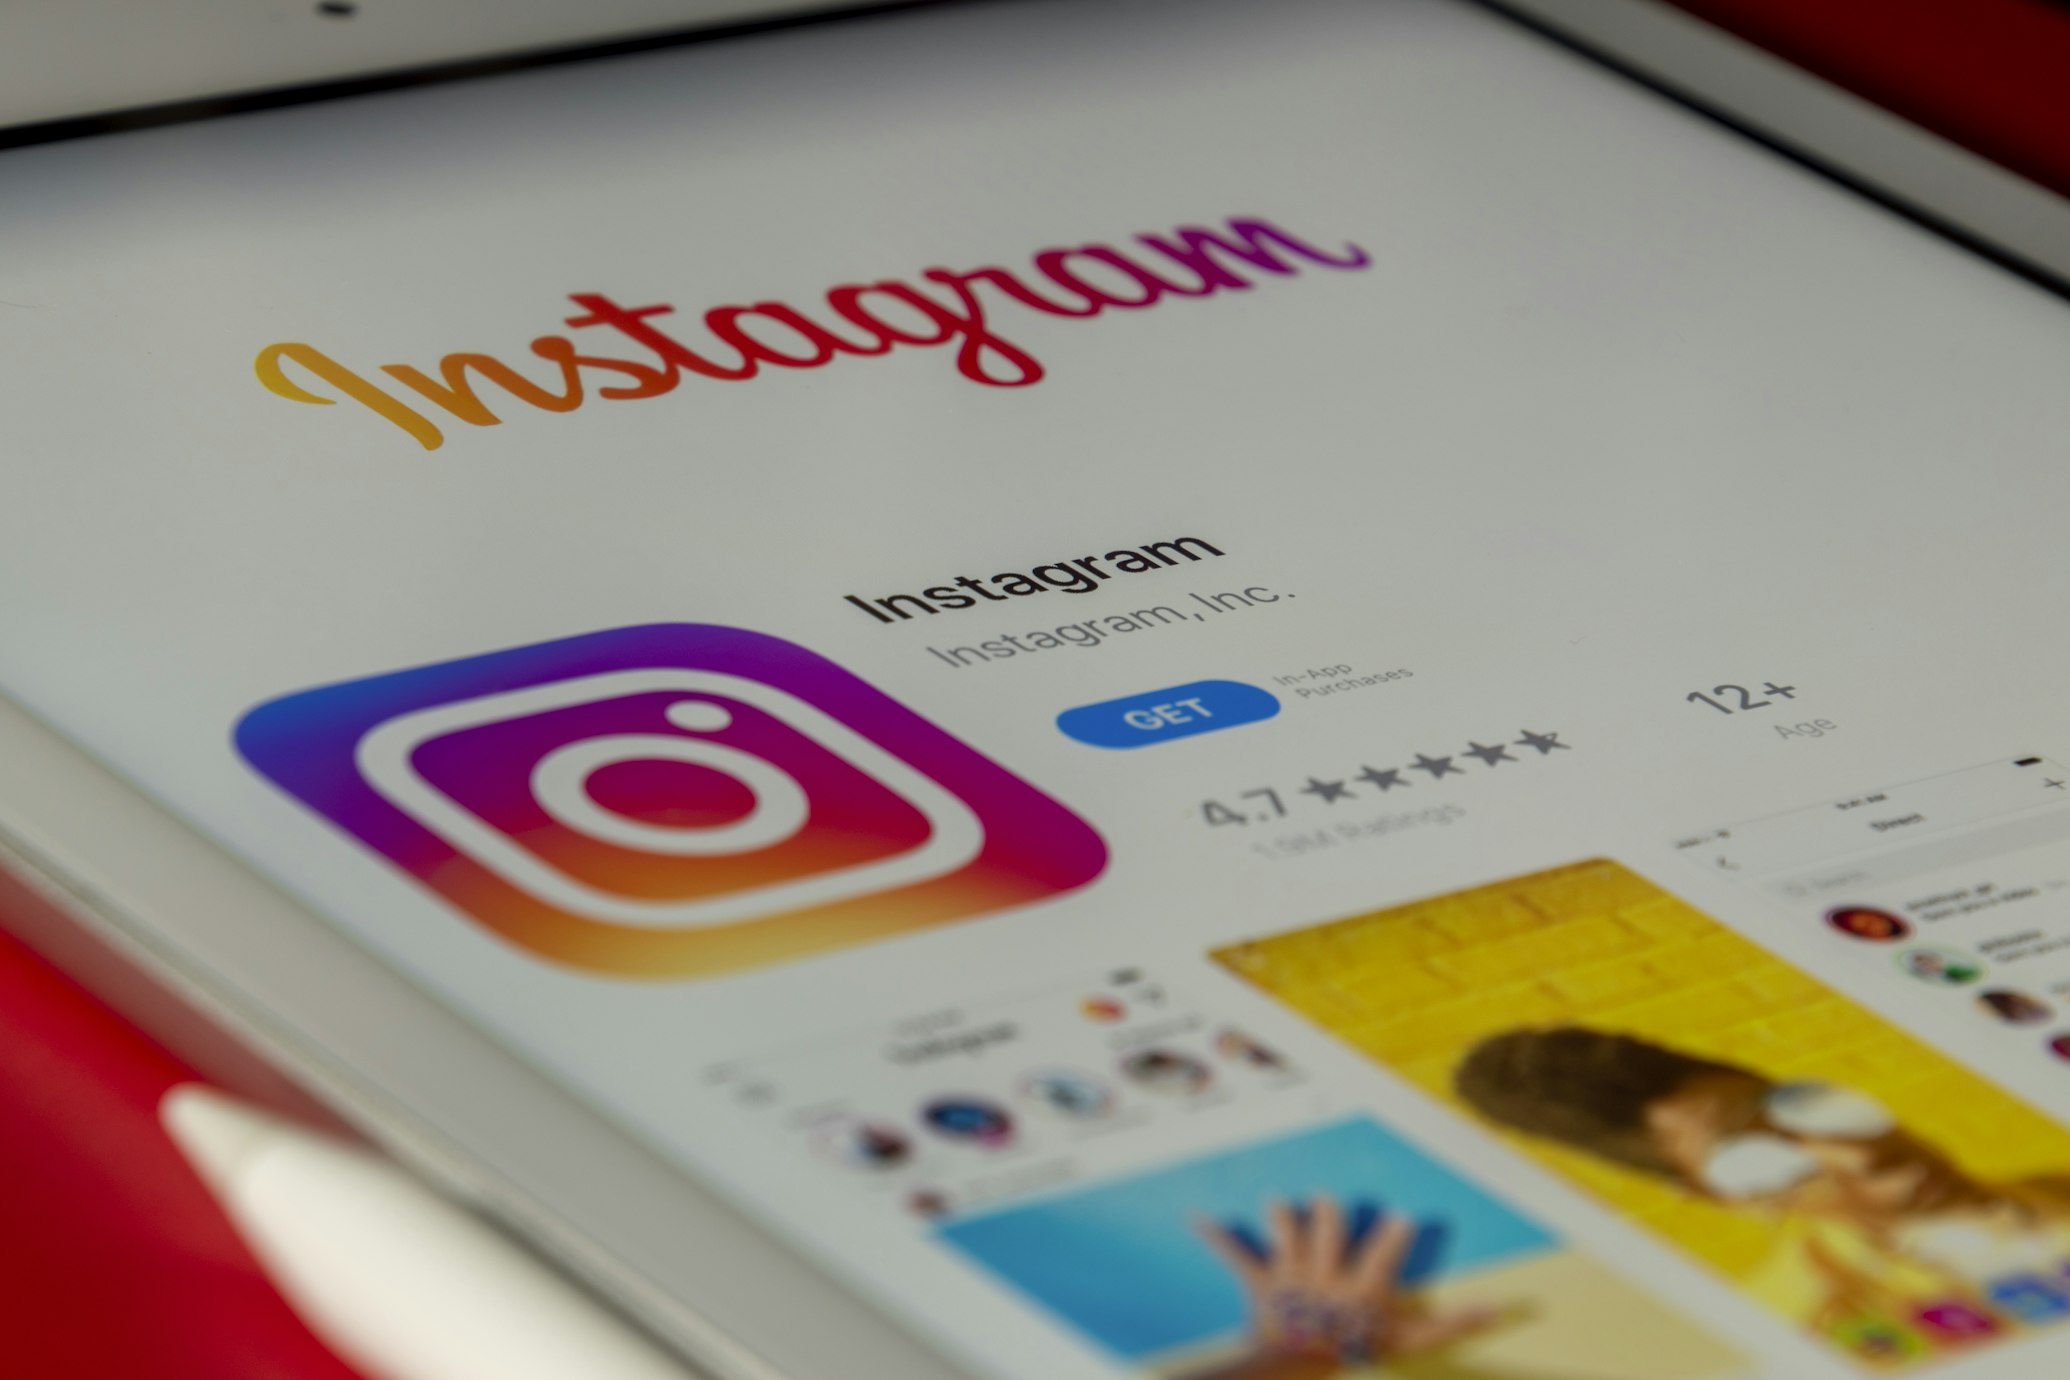 10 Best Ways To Fix Unable to Log In to Instagram on Android and iPhone